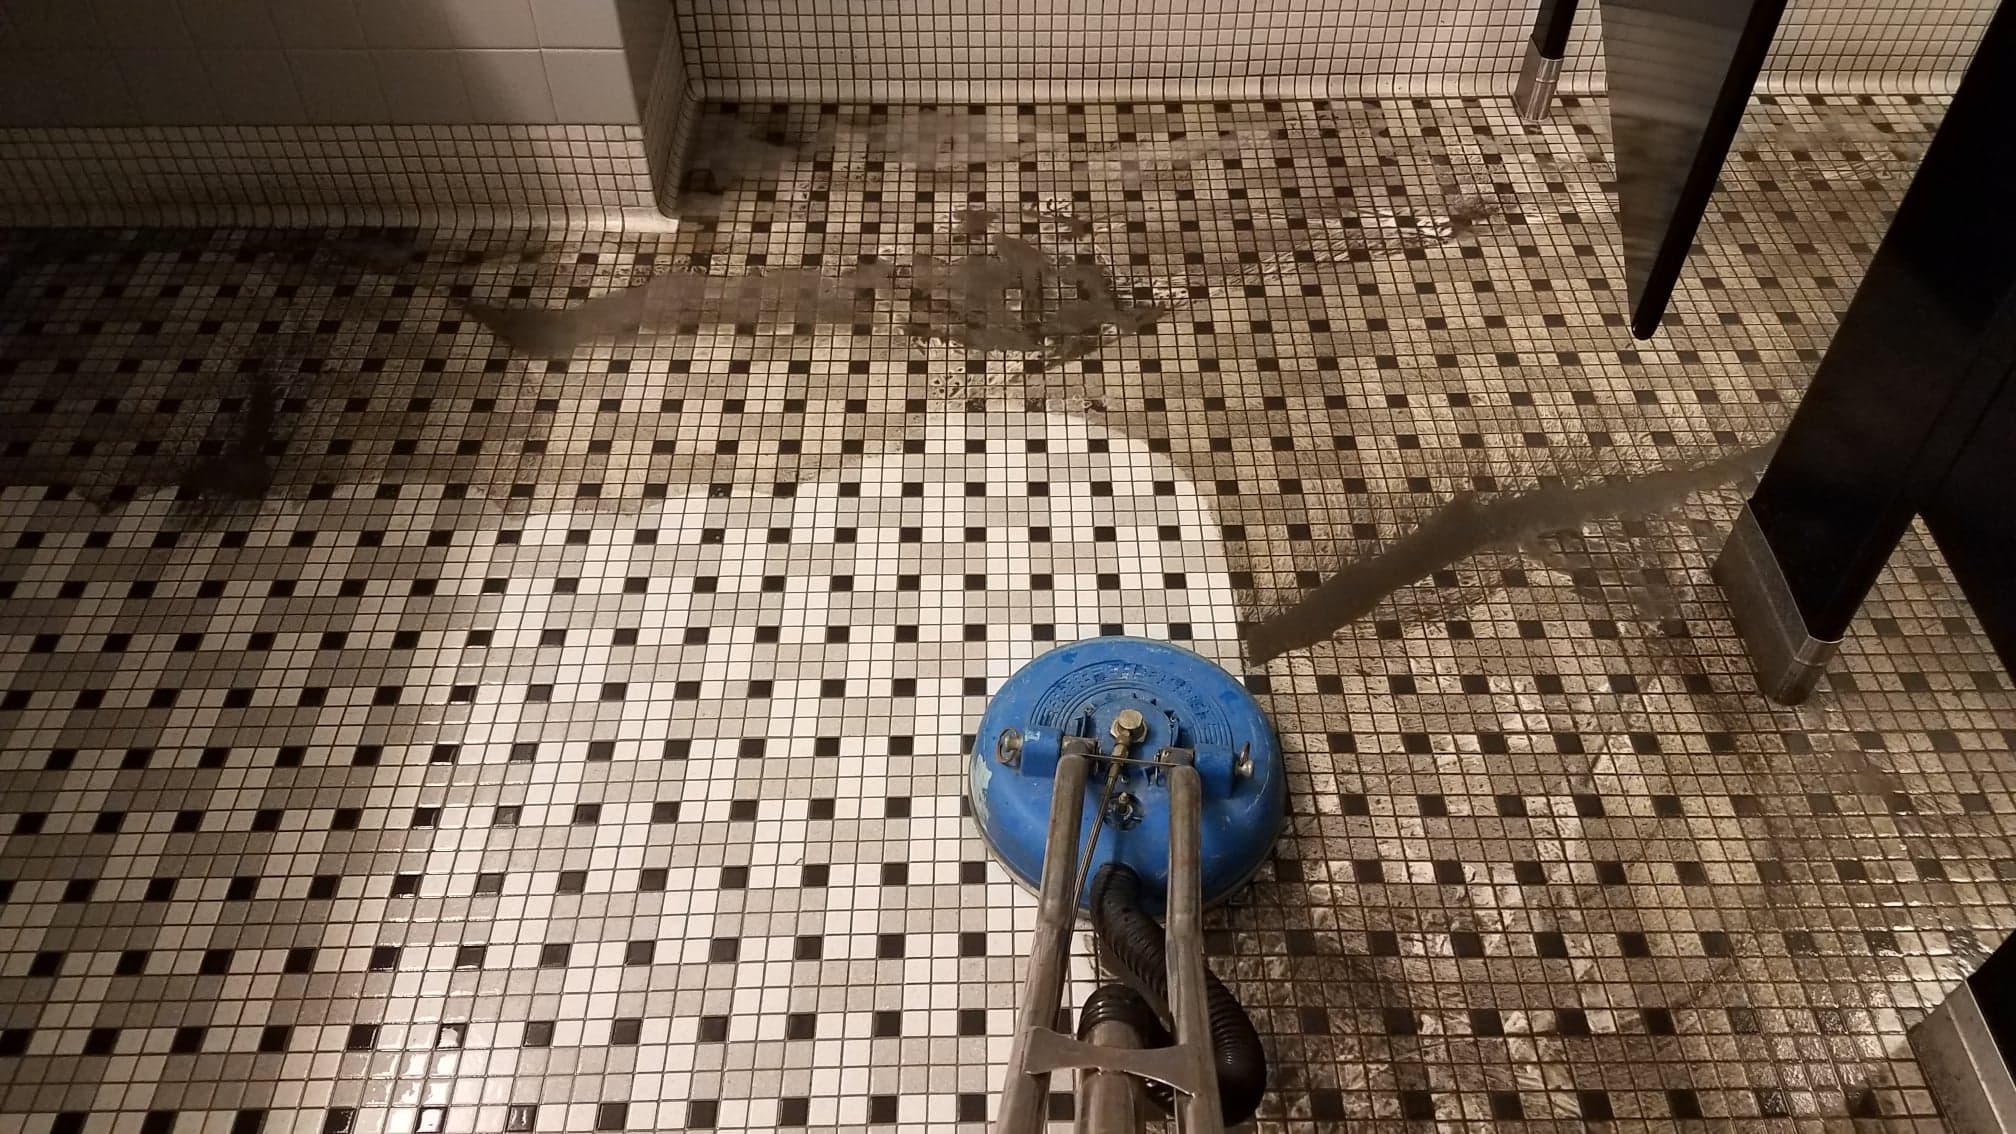 Tile & Grout Cleaning, Epoxy Color Sealing